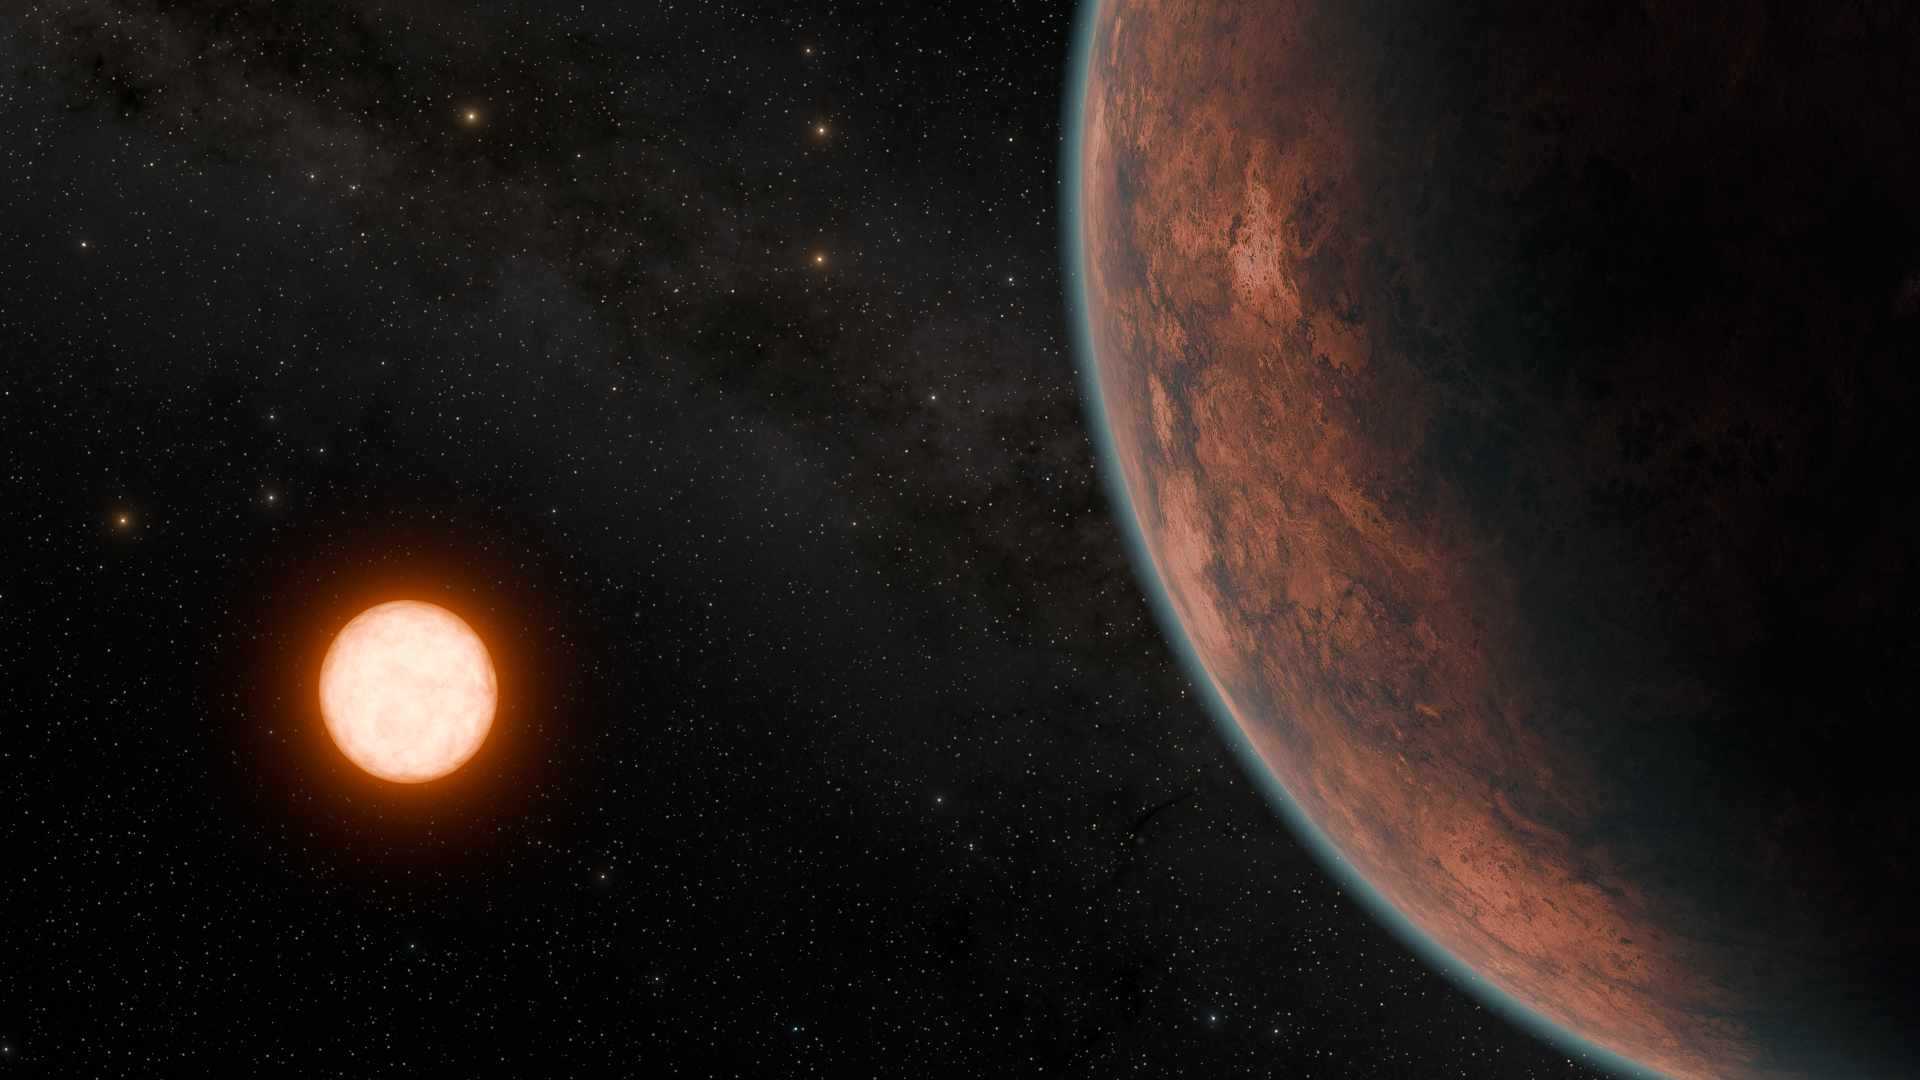 A New Earth-like Planet Discovered in the Constellation Pisces